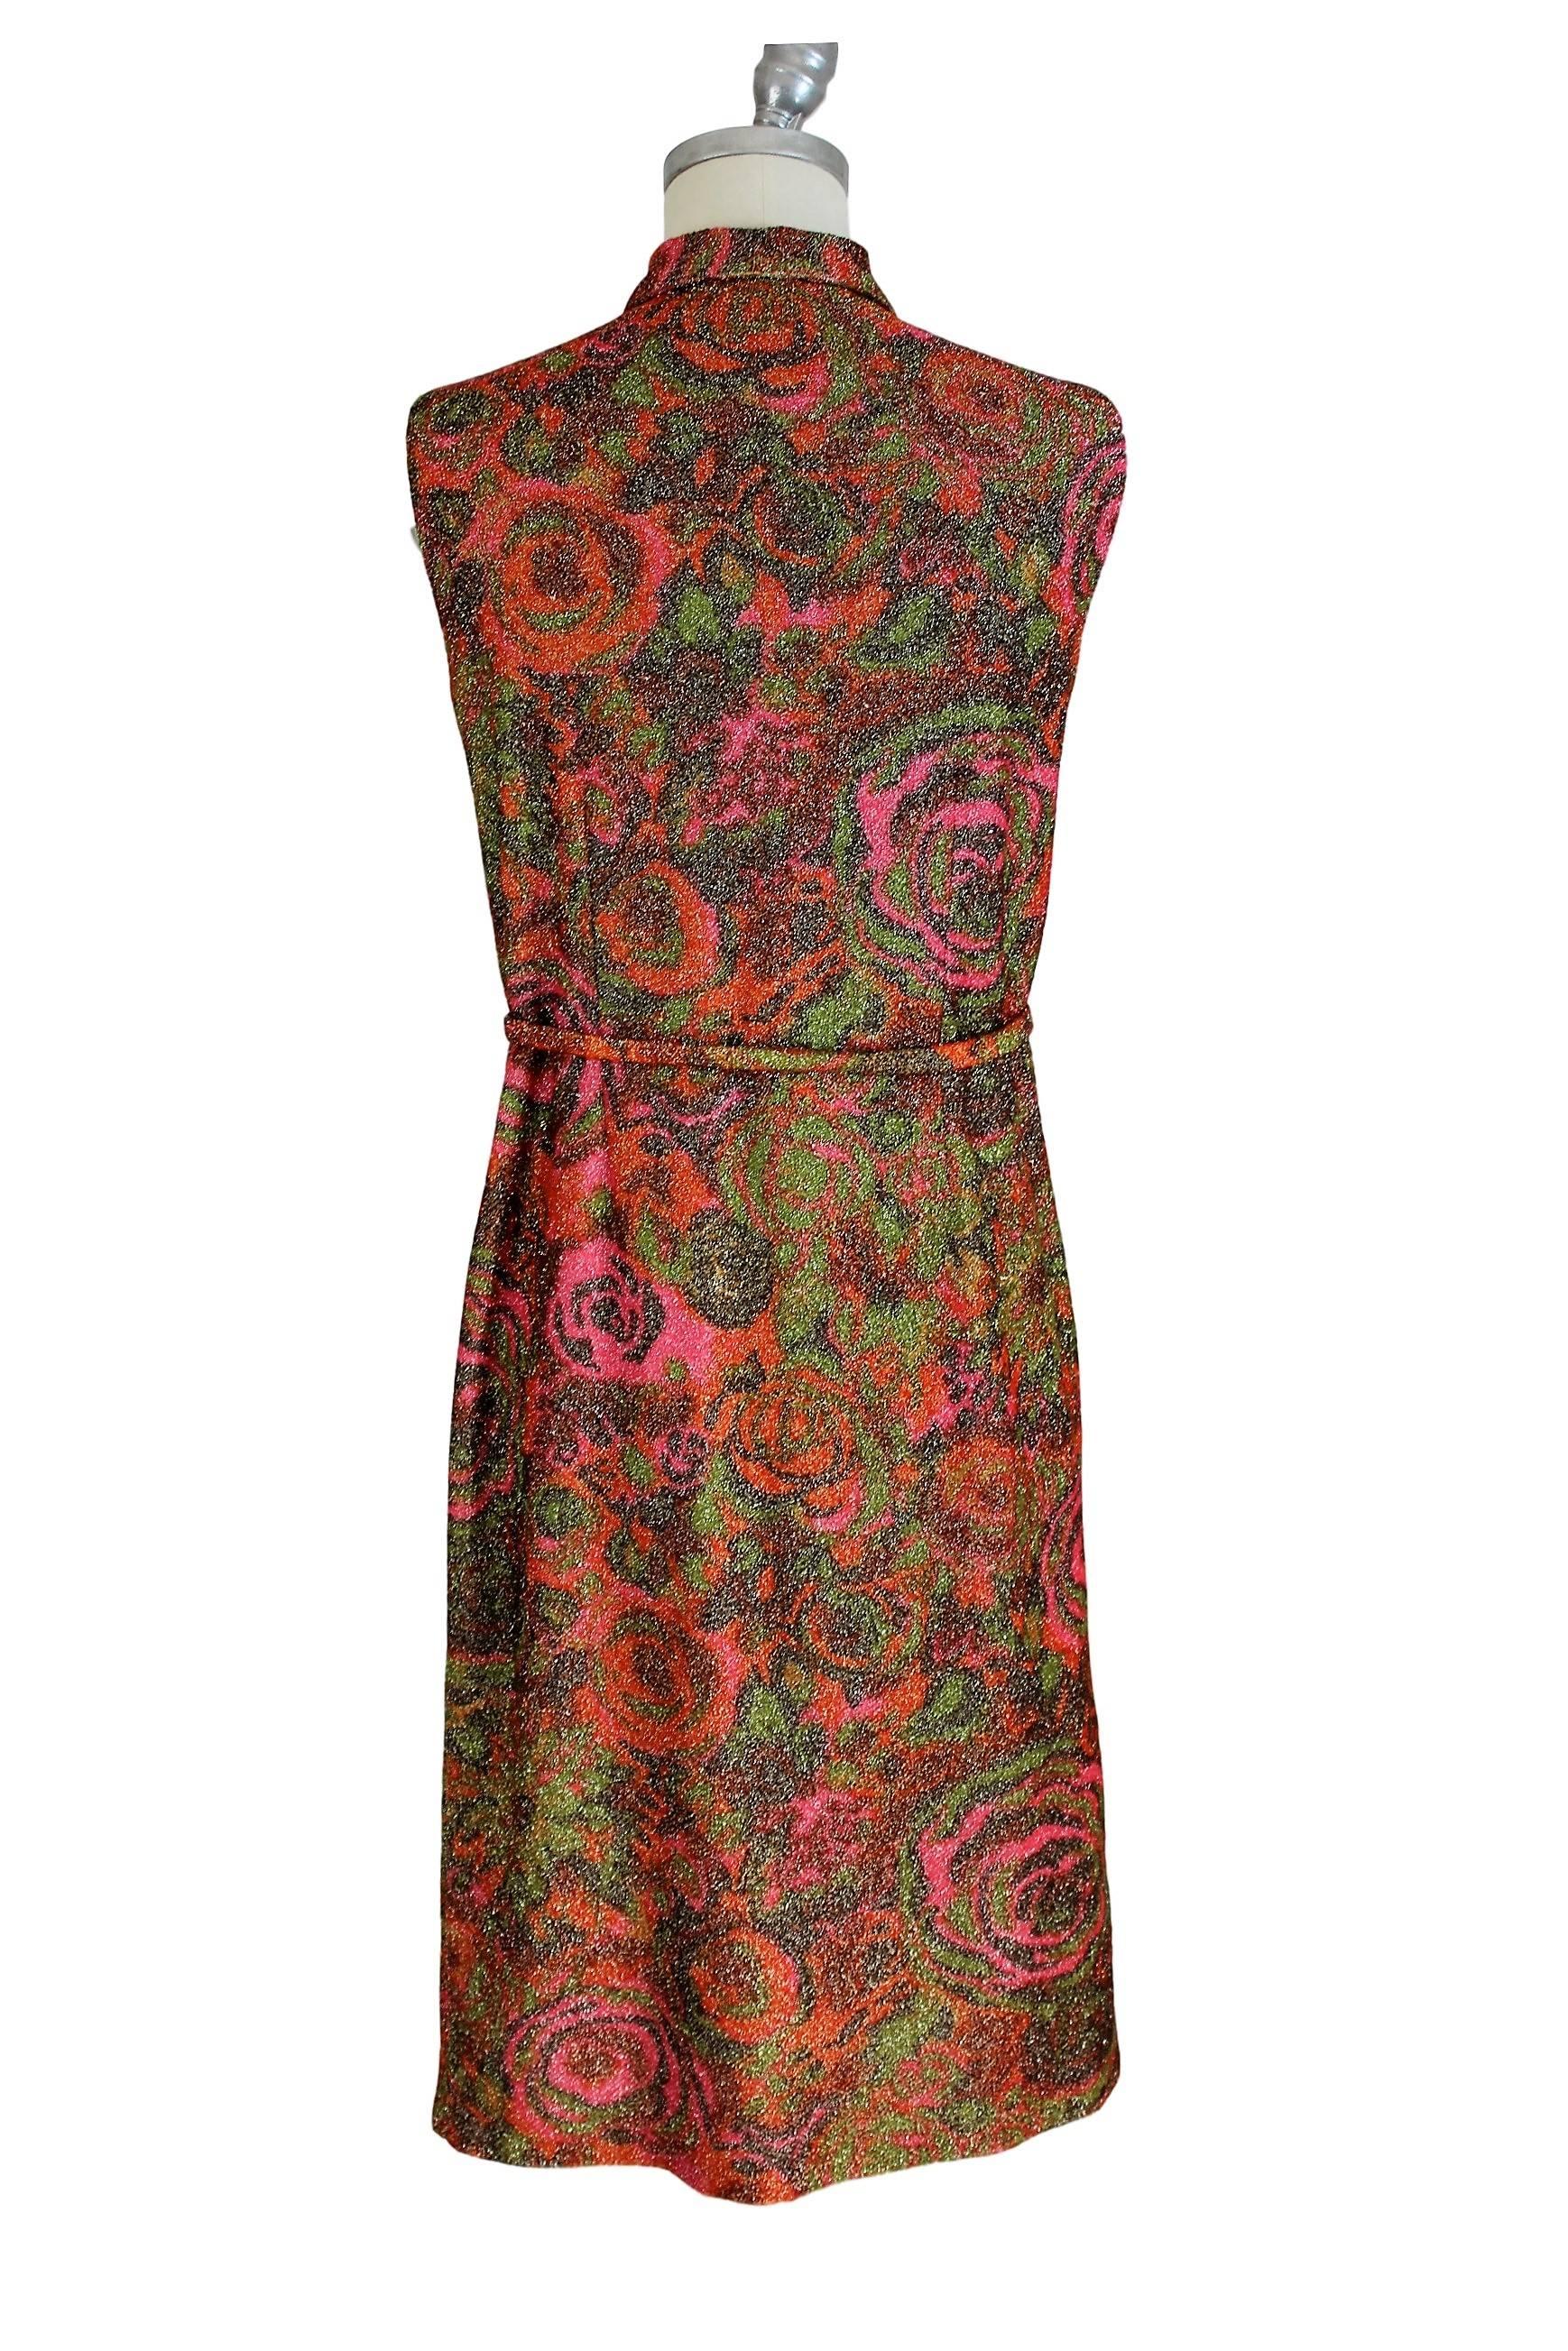 Rare tailored Sorelle Fontana dress Vintage 1960s gleaming metallic floral red, V neck with closed empire style buttons. Belted on the waist.

Size: 42 (IT) / 36 (NL/DE) 

Measures: 

Shoulders: 42 cm 
Armpit to armpit: 46 cm 
Sleeves: no 
Length: